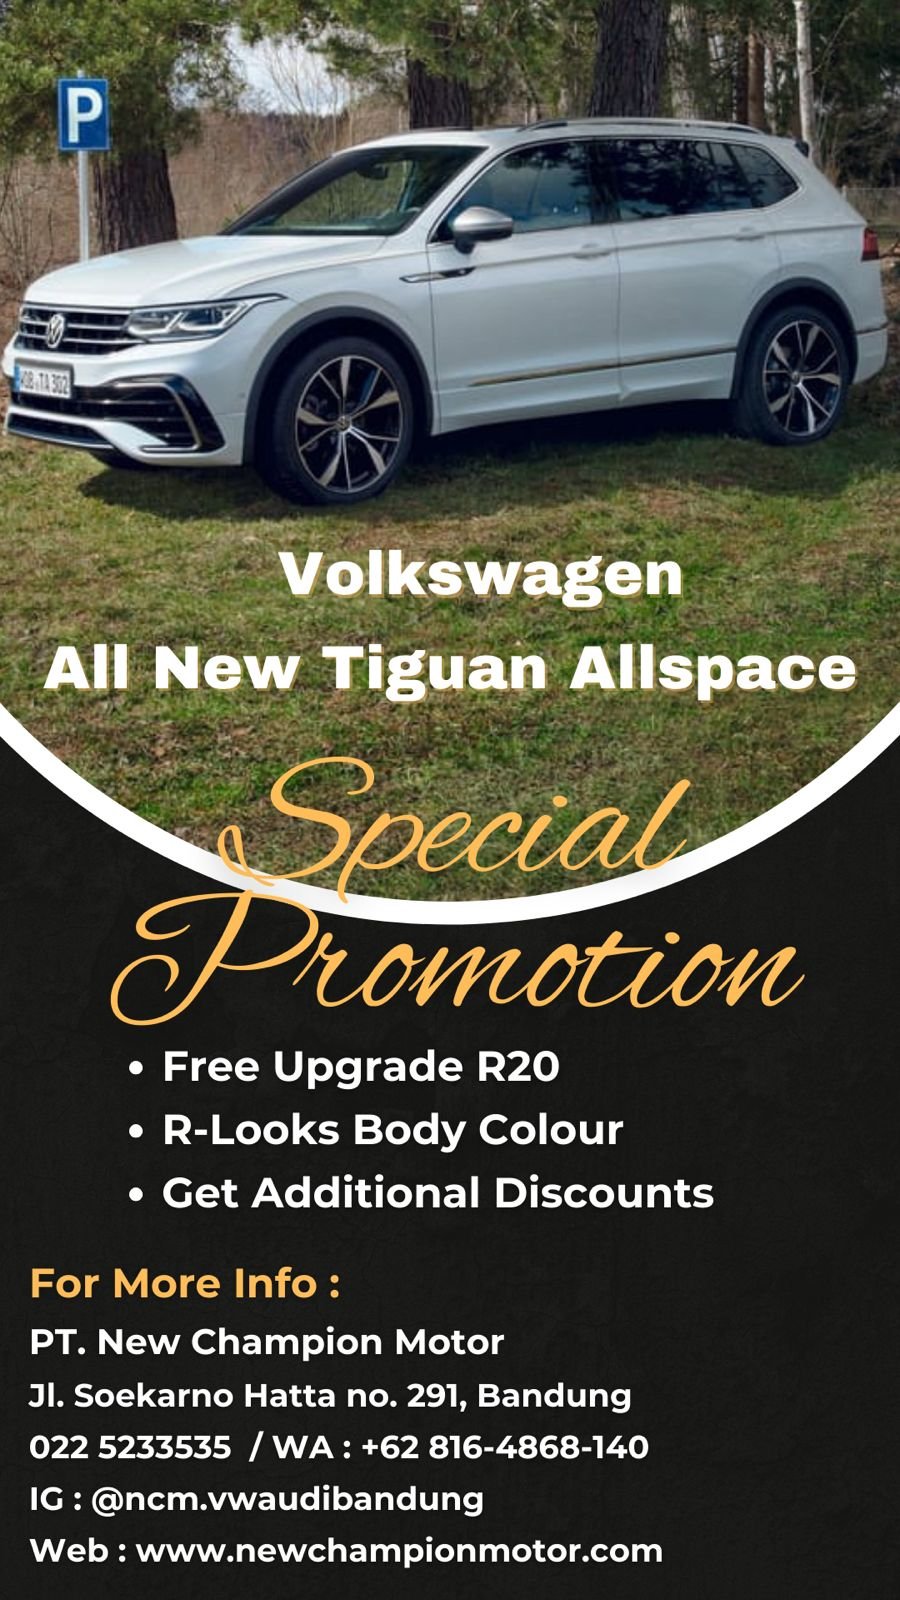 All New Tiguan Allspace Special Promotion @NCM Bandung